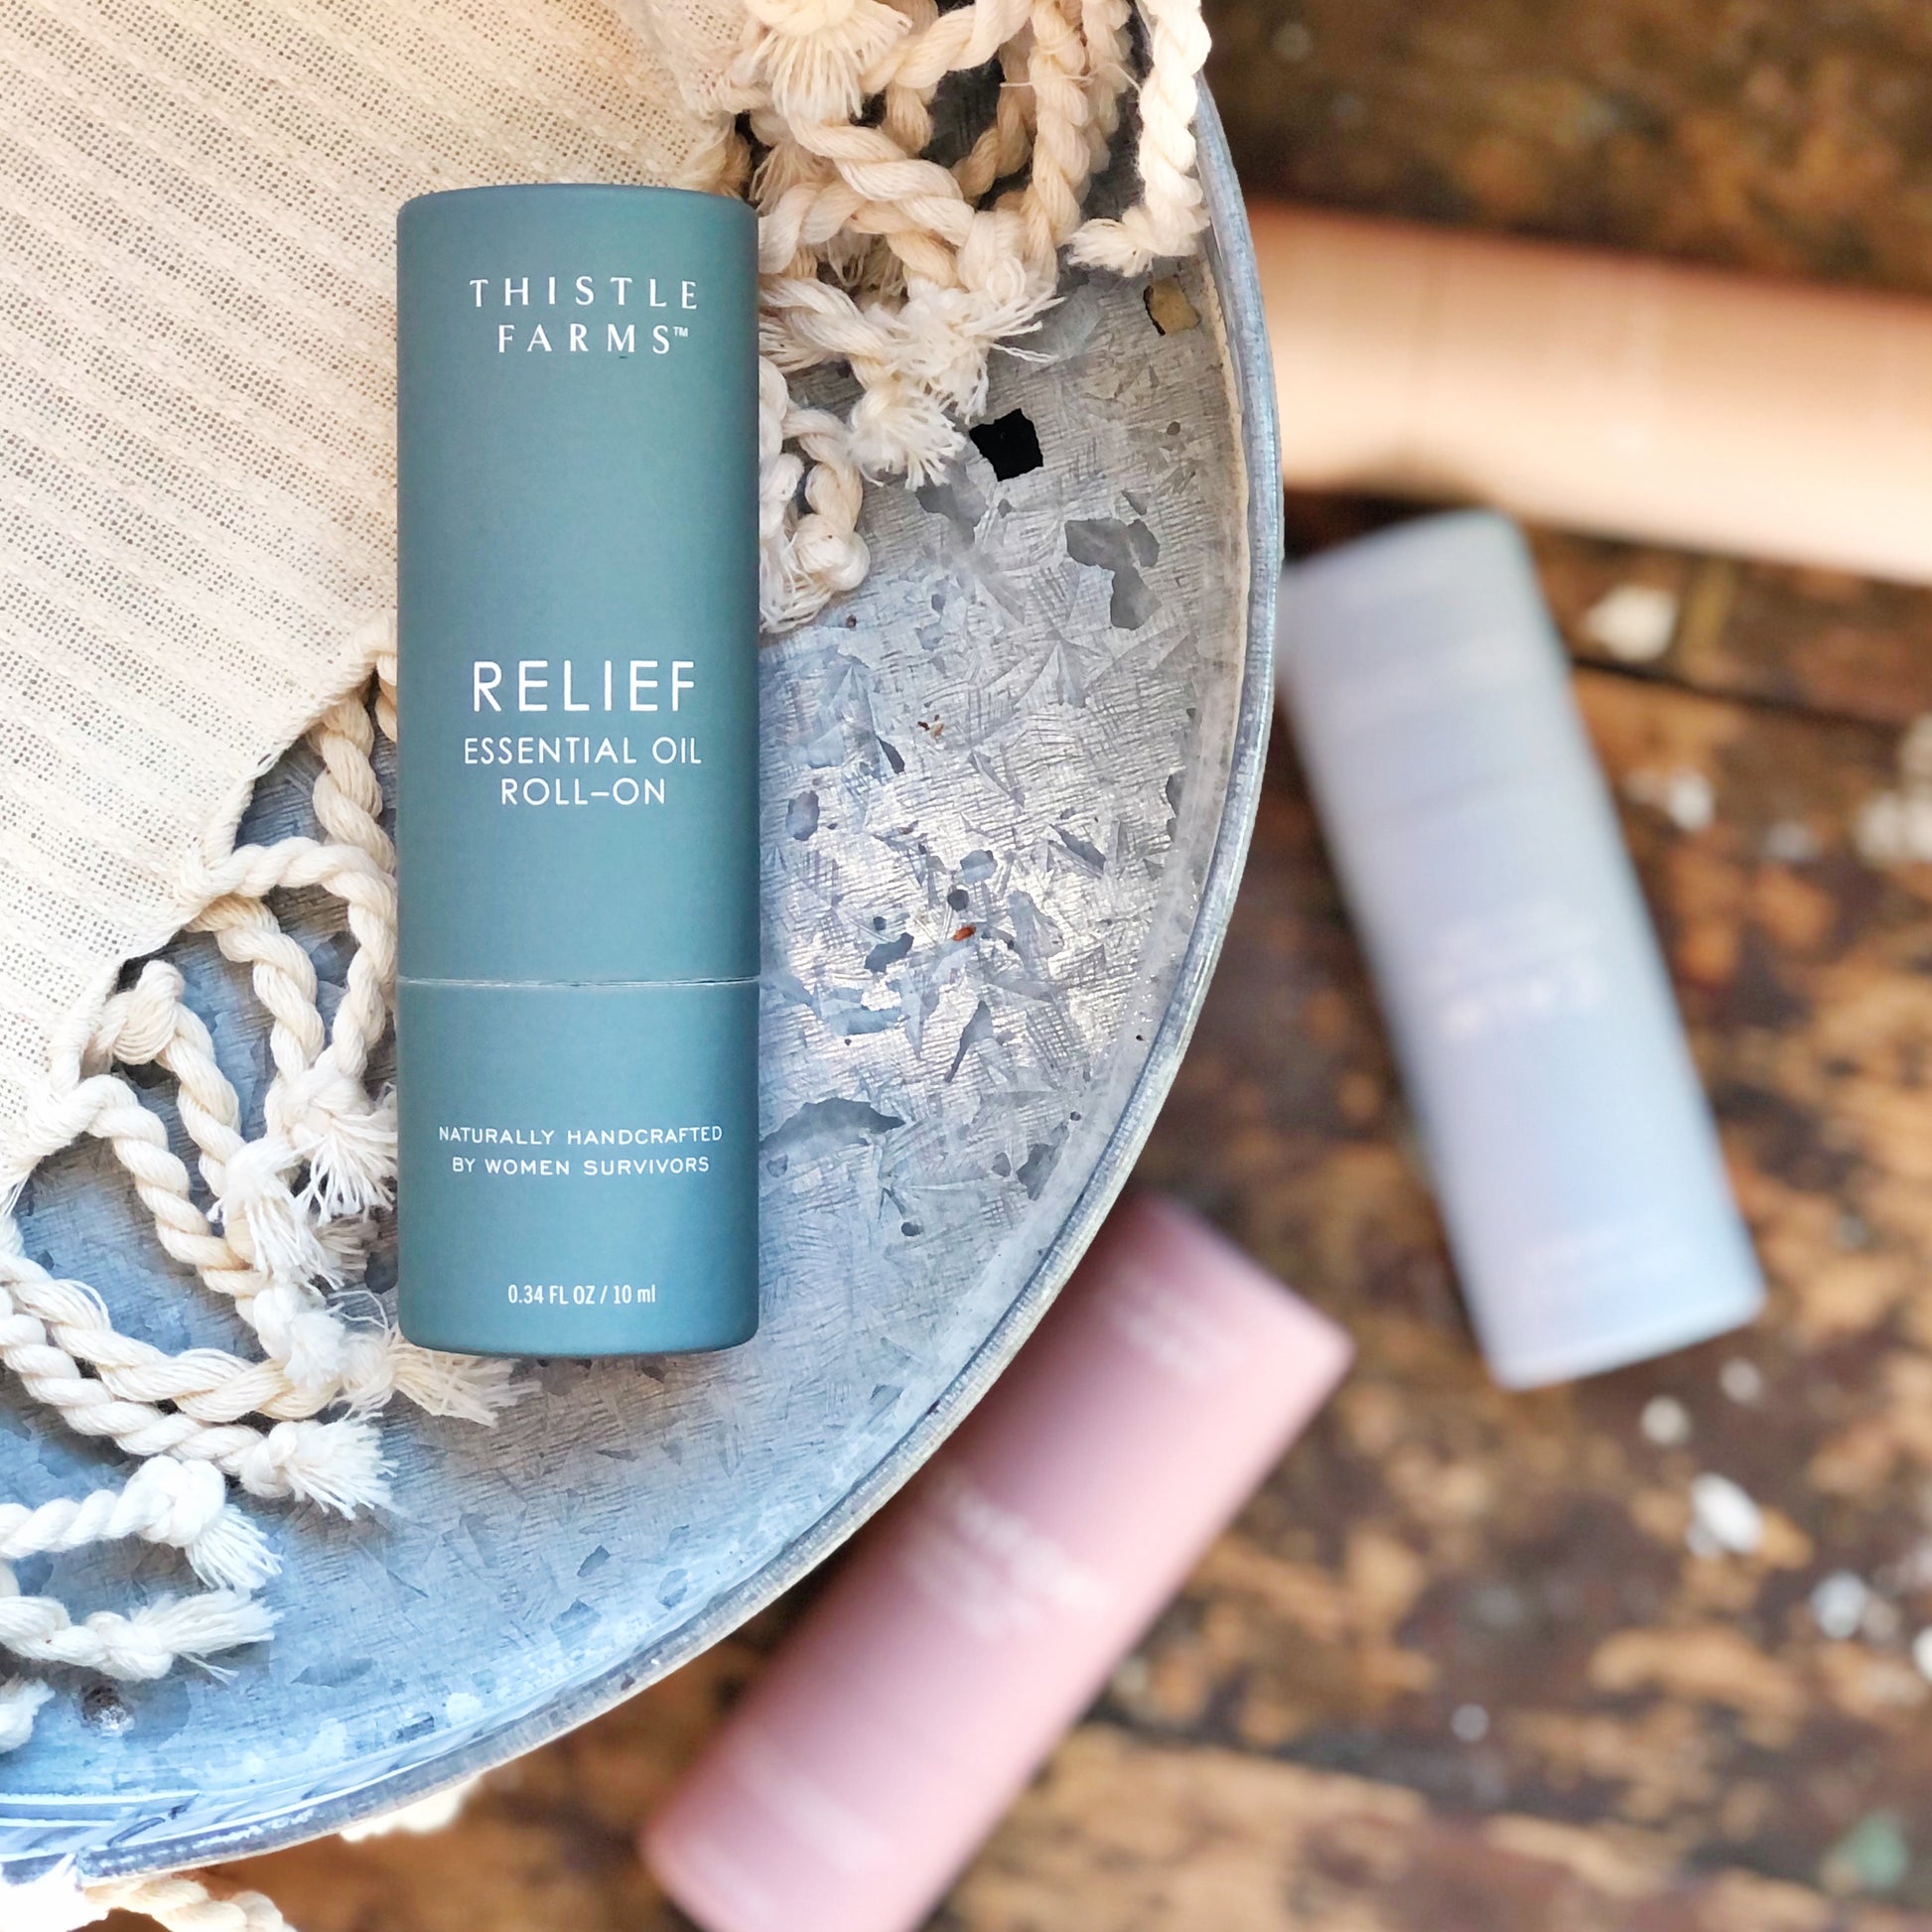 A teal container of Thistle Farms relief essential oil roll on a metal tray